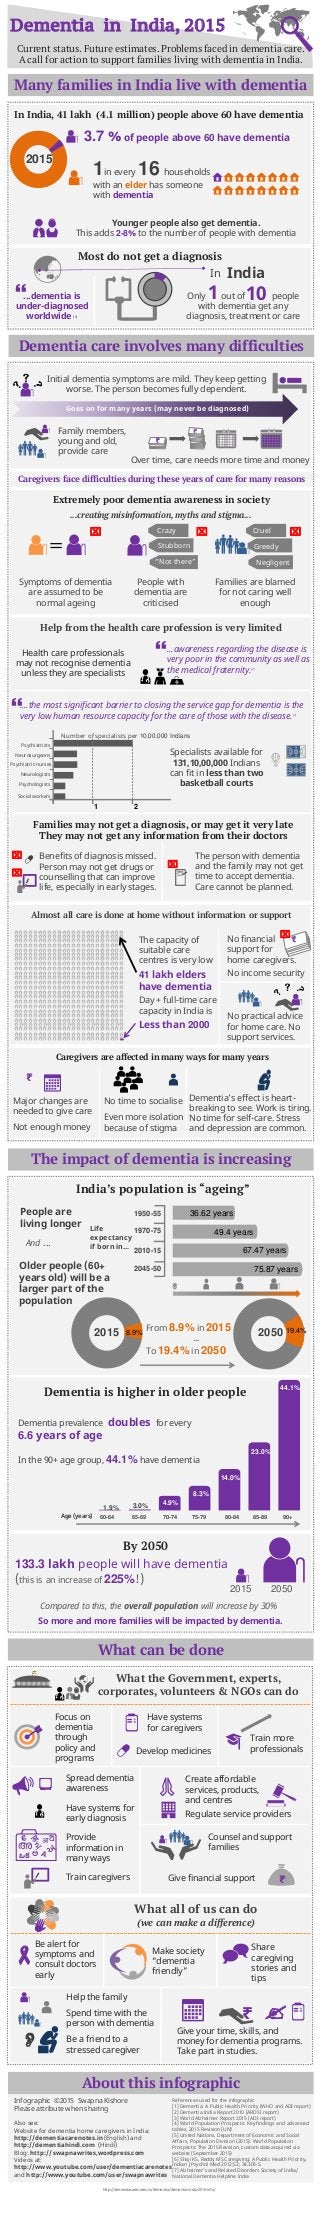 Dementia in India, 2015
Current status. Future estimates. Problems faced in dementia care.
A call for action to support families living with dementia in India.

Many families in India live with dementia
Younger people also get dementia.
This adds 2-8% to the number of people with dementia
🏠🏠🏠🏠🏠🏠🏠🏠
🏠🏠🏠🏠🏠🏠🏠🏠
In India, 41 lakh (4.1 million) people above 60 have dementia
3.7 % of people above 60 have dementia
2015
1in every 16 households
with an elder has someone
with dementia

...dementia is
under-diagnosed
worldwide [1]
IndiaIn
1 10Only out of people
with dementia get any
diagnosis, treatment or care
Most do not get a diagnosis

Dementia care involves many difficulties
Caregivers face difficulties during these years of care for many reasons
 Initial dementia symptoms are mild. They keep getting
worse. The person becomes fully dependent.

Family members,
young and old,
provide care
Goes on for many years (may never be diagnosed)
Over time, care needs more time and money
Symptoms of dementia
are assumed to be
normal ageing
Crazy

People with
dementia are
criticised
Families are blamed
for not caring well
enough
Extremely poor dementia awareness in society
...creating misinformation, myths and stigma...
 
=

Stubborn
“Not there”
Cruel
Greedy
Negligent
Specialists available for
131,10,00,000 Indians
can fit in less than two
basketball courts
Health care professionals
may not recognise dementia
unless they are specialists
...awareness regarding the disease is
very poor in the community as well as
the medical fraternity.[2]

Families may not get a diagnosis, or may get it very late
They may not get any information from their doctors
Benefits of diagnosis missed.
Person may not get drugs or
counselling that can improve
life, especially in early stages.
💊


The person with dementia
and the family may not get
time to accept dementia.
Care cannot be planned.
Help from the health care profession is very limited
....the most significant barrier to closing the service gap for dementia is the
very low human resource capacity for the care of those with the disease.[2]

Number of specialists per 10,00,000 Indians
Psychiatrists
Neurosurgeons
Psychiatric nurses
Neurologists
Psychologists
Social workers
1 2
Dementia’s effect is heart-
breaking to see. Work is tiring.
No time for self-care. Stress
and depression are common.
Major changes are
needed to give care
Not enough money
📅₹
No time to socialise
Even more isolation
because of stigma
Caregivers are affected in many ways for many years
No financial
support for
home caregivers.
🏠 🏠 🏠 🏠 🏠 🏠 🏠 🏠 🏠 🏠🏠 🏠 🏠 🏠 🏠 🏠 🏠 🏠 🏠 🏠🏠 🏠 🏠 🏠 🏠
🏠 🏠 🏠 🏠 🏠 🏠 🏠 🏠 🏠 🏠🏠 🏠 🏠 🏠 🏠 🏠 🏠 🏠 🏠 🏠🏠 🏠 🏠 🏠 🏠
🏠 🏠 🏠 🏠 🏠 🏠 🏠 🏠 🏠 🏠🏠 🏠 🏠 🏠 🏠 🏠 🏠 🏠 🏠 🏠🏠 🏠 🏠 🏠 🏠
🏠 🏠 🏠 🏠 🏠 🏠 🏠 🏠 🏠 🏠🏠 🏠 🏠 🏠 🏠 🏠 🏠 🏠 🏠 🏠🏠 🏠 🏠 🏠 🏠
🏠 🏠 🏠 🏠 🏠 🏠 🏠 🏠 🏠 🏠🏠 🏠 🏠 🏠 🏠 🏠 🏠 🏠 🏠 🏠🏠 🏠 🏠 🏠 🏠
🏠 🏠 🏠 🏠 🏠 🏠 🏠 🏠 🏠 🏠🏠 🏠 🏠 🏠 🏠 🏠 🏠 🏠 🏠 🏠🏠 🏠 🏠 🏠 🏠
🏠 🏠 🏠 🏠 🏠 🏠 🏠 🏠 🏠 🏠🏠 🏠 🏠 🏠 🏠 🏠 🏠 🏠 🏠 🏠🏠 🏠 🏠 🏠 🏠
🏠 🏠 🏠 🏠 🏠 🏠 🏠 🏠 🏠 🏠🏠 🏠 🏠 🏠 🏠 🏠 🏠 🏠 🏠 🏠🏠 🏠 🏠 🏠 🏠
🏠 🏠 🏠 🏠 🏠 🏠 🏠 🏠 🏠 🏠🏠 🏠 🏠 🏠 🏠 🏠 🏠 🏠 🏠 🏠🏠 🏠 🏠 🏠 🏠
🏠 🏠 🏠 🏠 🏠 🏠 🏠 🏠 🏠 🏠🏠 🏠 🏠 🏠 🏠 🏠 🏠 🏠 🏠 🏠🏠 🏠 🏠 🏠 🏠
🏠 🏠 🏠 🏠 🏠 🏠 🏠 🏠 🏠 🏠🏠 🏠 🏠 🏠 🏠 🏠 🏠 🏠 🏠 🏠🏠 🏠 🏠 🏠 🏠
🏠 🏠 🏠 🏠 🏠 🏠 🏠 🏠 🏠 🏠🏠 🏠 🏠 🏠 🏠 🏠 🏠 🏠 🏠 🏠🏠 🏠 🏠 🏠 🏠
🏠 🏠 🏠 🏠 🏠 🏠 🏠 🏠 🏠 🏠🏠 🏠 🏠 🏠 🏠 🏠 🏠 🏠 🏠 🏠🏠 🏠 🏠 🏠 🏠
🏠 🏠 🏠 🏠 🏠 🏠 🏠 🏠 🏠 🏠🏠 🏠 🏠 🏠 🏠 🏠 🏠 🏠 🏠 🏠🏠 🏠 🏠 🏠 🏠
🏠 🏠 🏠 🏠 🏠 🏠 🏠 🏠 🏠 🏠🏠 🏠 🏠 🏠 🏠 🏠 🏠 🏠 🏠 🏠🏠 🏠 🏠 🏠 🏠
🏠 🏠 🏠 🏠 🏠 🏠 🏠 🏠 🏠 🏠🏠 🏠 🏠 🏠 🏠 🏠 🏠 🏠 🏠 🏠🏠 🏠 🏠 🏠 🏠
🏠 🏠 🏠 🏠 🏠 🏠 🏠 🏠 🏠 🏠🏠 🏠 🏠 🏠 🏠 🏠 🏠 🏠 🏠 🏠🏠 🏠 🏠 🏠 🏠
🏠 🏠 🏠 🏠 🏠 🏠 🏠 🏠 🏠 🏠🏠 🏠 🏠 🏠 🏠 🏠 🏠 🏠 🏠 🏠🏠 🏠 🏠 🏠 🏠
🏠 🏠 🏠 🏠 🏠 🏠 🏠 🏠 🏠 🏠🏠 🏠 🏠 🏠 🏠 🏠 🏠 🏠 🏠 🏠🏠 🏠 🏠 🏠 🏠
🏠 🏠 🏠 🏠 🏠 🏠 🏠 🏠 🏠 🏠🏠 🏠 🏠 🏠 🏠 🏠 🏠 🏠 🏠 🏠🏠 🏠 🏠 🏠 🏠
🏠 🏠 🏠 🏠 🏠 🏠 🏠 🏠 🏠 🏠🏠 🏠 🏠 🏠 🏠 🏠 🏠 🏠 🏠 🏠🏠 🏠 🏠 🏠 🏠
🏠 🏠 🏠 🏠 🏠 🏠 🏠 🏠 🏠 🏠🏠 🏠 🏠 🏠 🏠 🏠 🏠 🏠 🏠 🏠🏠 🏠 🏠 🏠 🏠
🏠 🏠 🏠 🏠 🏠 🏠 🏠 🏠 🏠 🏠🏠 🏠 🏠 🏠 🏠 🏠 🏠 🏠 🏠 🏠🏠 🏠 🏠 🏠 🏠
🏠 🏠 🏠 🏠 🏠 🏠 🏠 🏠 🏠 🏠🏠 🏠 🏠 🏠 🏠 🏠 🏠 🏠 🏠 🏠🏠 🏠 🏠 🏠 🏠
41 lakh elders
have dementia
Less than 2000
Day + full-time care
capacity in India is
The capacity of
suitable care
centres is very low


No practical advice
for home care. No
support services.
No income security

Almost all care is done at home without information or support
People are
living longer Life
expectancy
if born in...
Older people (60+
years old) will be a
larger part of the
population
36.62 years
49.4 years
67.47 years
75.87 years
1950-55
1970-75
2010-15
2045-50
And ...
India’s population is “ageing”
The impact of dementia is increasing
60-64 70-74 80-84 90+Age (years) 65-69 75-79 85-89
1.9% 3.0% 4.9%
8.3%
14.0%
23.0%
44.1%
Dementia is higher in older people
Dementia prevalence doubles for every
6.6 years of age
In the 90+ age group, 44.1% have dementia
From 8.9% in 2015
...
To 19.4% in 2050
2015 8.9% 2050 19.4%
133.3 lakh people will have dementia
(this is an increase of 225%!)
By 2050
Compared to this, the overall population will increase by 30%
So more and more families will be impacted by dementia.
2015 2050
What can be done
What the Government, experts,
corporates, volunteers & NGOs can do
Have systems
for caregivers
📣
Spread dementia
awareness
Have systems for
early diagnosis
Train more
professionals
₹Give financial support
Provide
information in
many ways
Counsel and support
families
Focus on
dementia
through
policy and
programs
Create affordable
services, products,
and centres
🏢 Regulate service providers
🎓💊
ఒక
ଅ
അ
अ
ಅ

Develop medicines
Train caregivers



Be alert for
symptoms and
consult doctors
early
Share
caregiving
stories and
tips
Help the family
Spend time with the
person with dementia
Make society
“dementia
friendly”
Be a friend to a
stressed caregiver

📅
Give your time, skills, and
money for dementia programs.
Take part in studies.
₹ 
What all of us can do
(we can make a difference)
References used for the infographic
[1] Dementia: A Public Health Priority (WHO and ADI report)
[2] Dementia India Report 2010 (ARDSI report)
[3] World Alzheimer Report 2015 (ADI report)
[4] World Population Prospects: Key findings and advanced
tables, 2015 Revision (UN)
[5] United Nations, Department of Economic and Social
Affairs, Population Division (2015). World Population
Prospects: The 2015 Revision, custom data acquired via
website (September 2015)
[6] Shaji KS, Reddy MS Caregiving: A Public Health Priority,
Indian J Psychol Med 2012;52; 34.303-5.
[7] Alzheimer’s and Related Disorders Society of India/
National Dementia Helpline India
Also see:
Website for dementia home caregivers in India:
http://dementiacarenotes.in (English) and
http://dementiahindi.com (Hindi)
Blog: http:// swapnawrites,wordpress.com
Videos at:
http://www.youtube.com/user/dementiacarenotes
and http://www.youtube.com/user/swapnawrites
Infographic ©2015 Swapna Kishore
Please attribute when sharing
About this infographic
http://dementiacarenotes.in/dementia/dementia-india-2015-info/
 